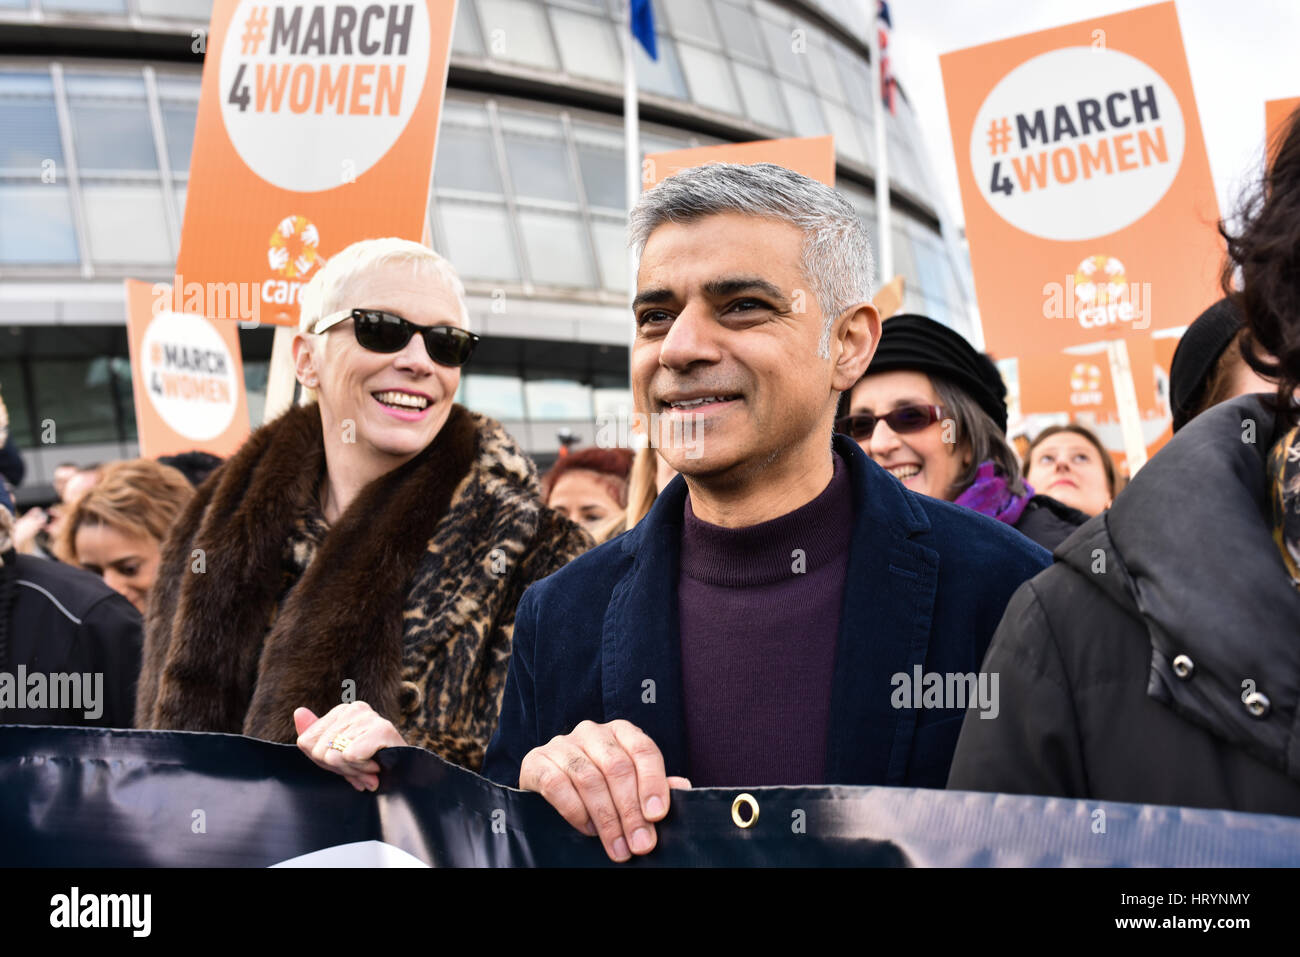 London, UK. 5th Mar, 2017. London Mayor Sadiq Khan leads the Care International Women's March across Tower Bridge, alongside Annie Lennox. Hundreds of protesters gathered to hear speeches, music and protest in central London for women's rights. Credit: Jacob Sacks-Jones/Alamy Live News. Stock Photo